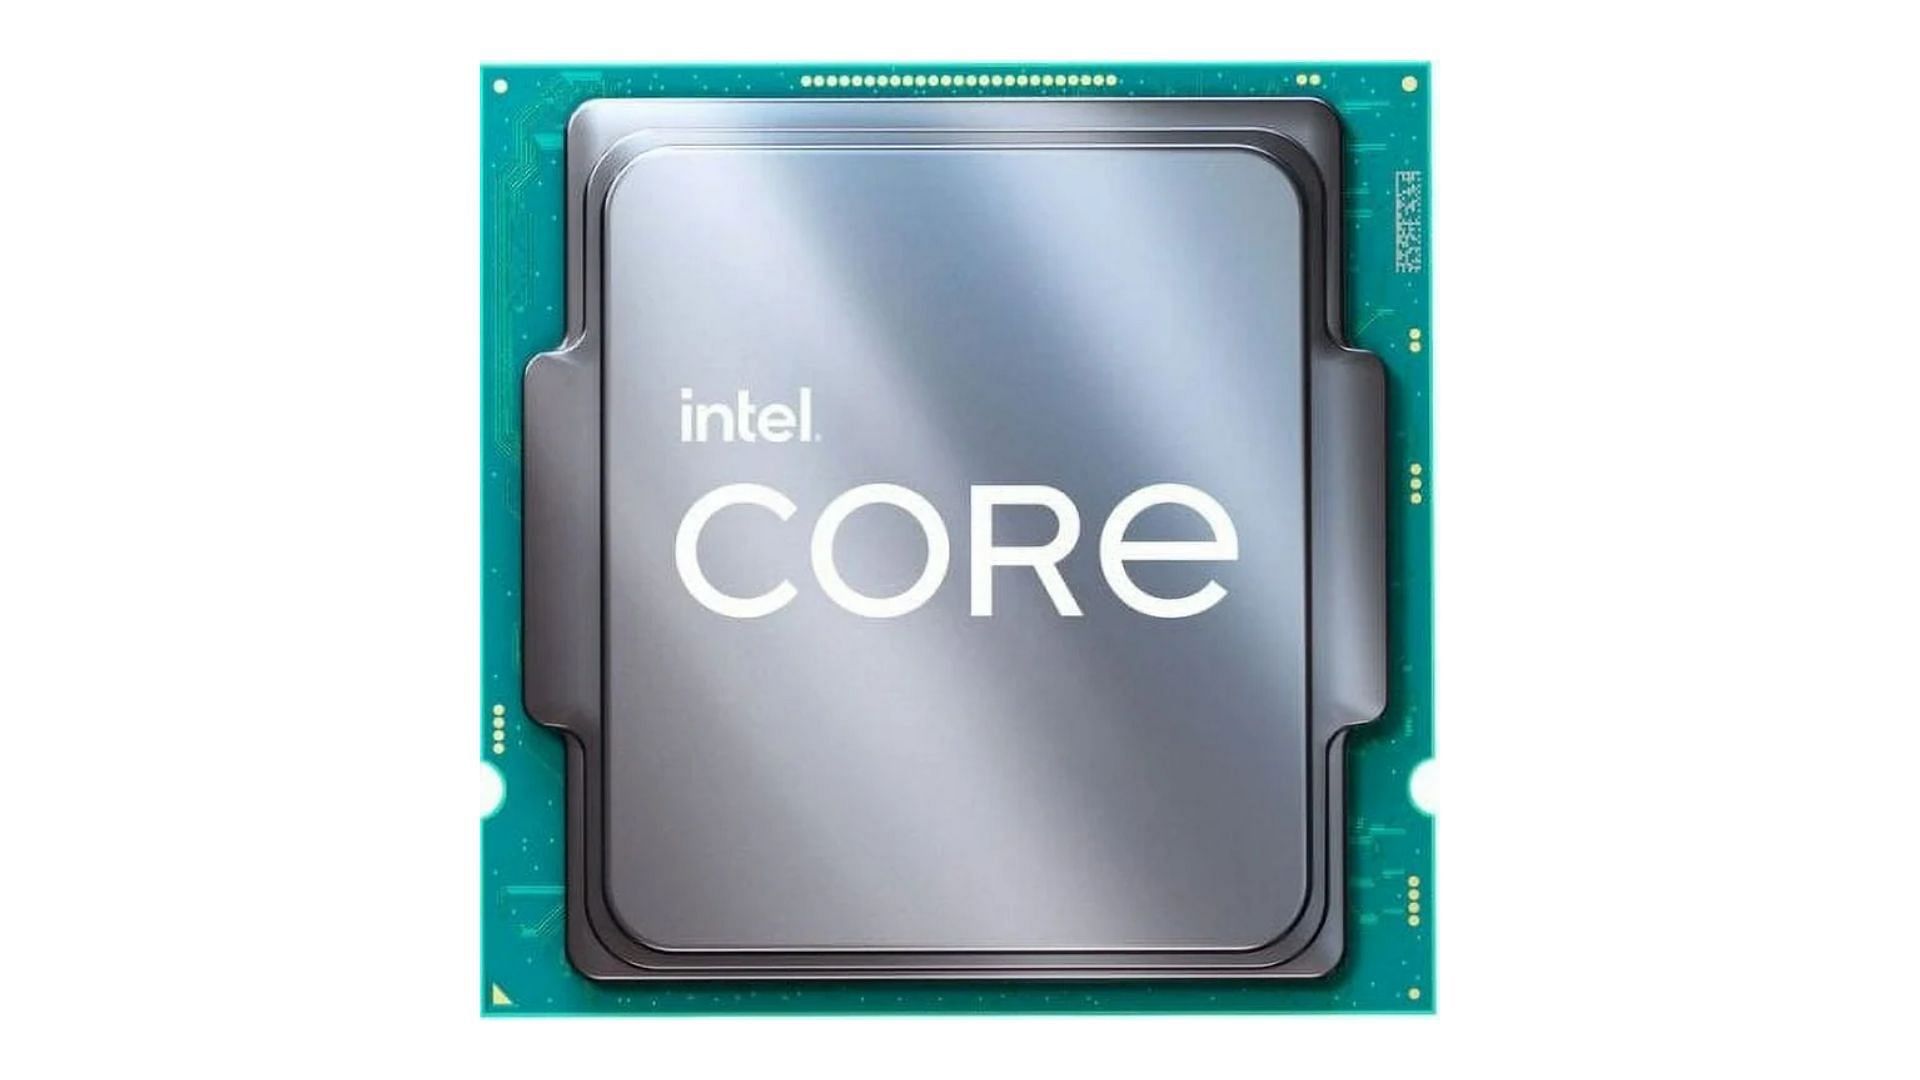 The Intel Core i7-14700K is a capable chip for high-end gaming PCs (Image via Best Buy)